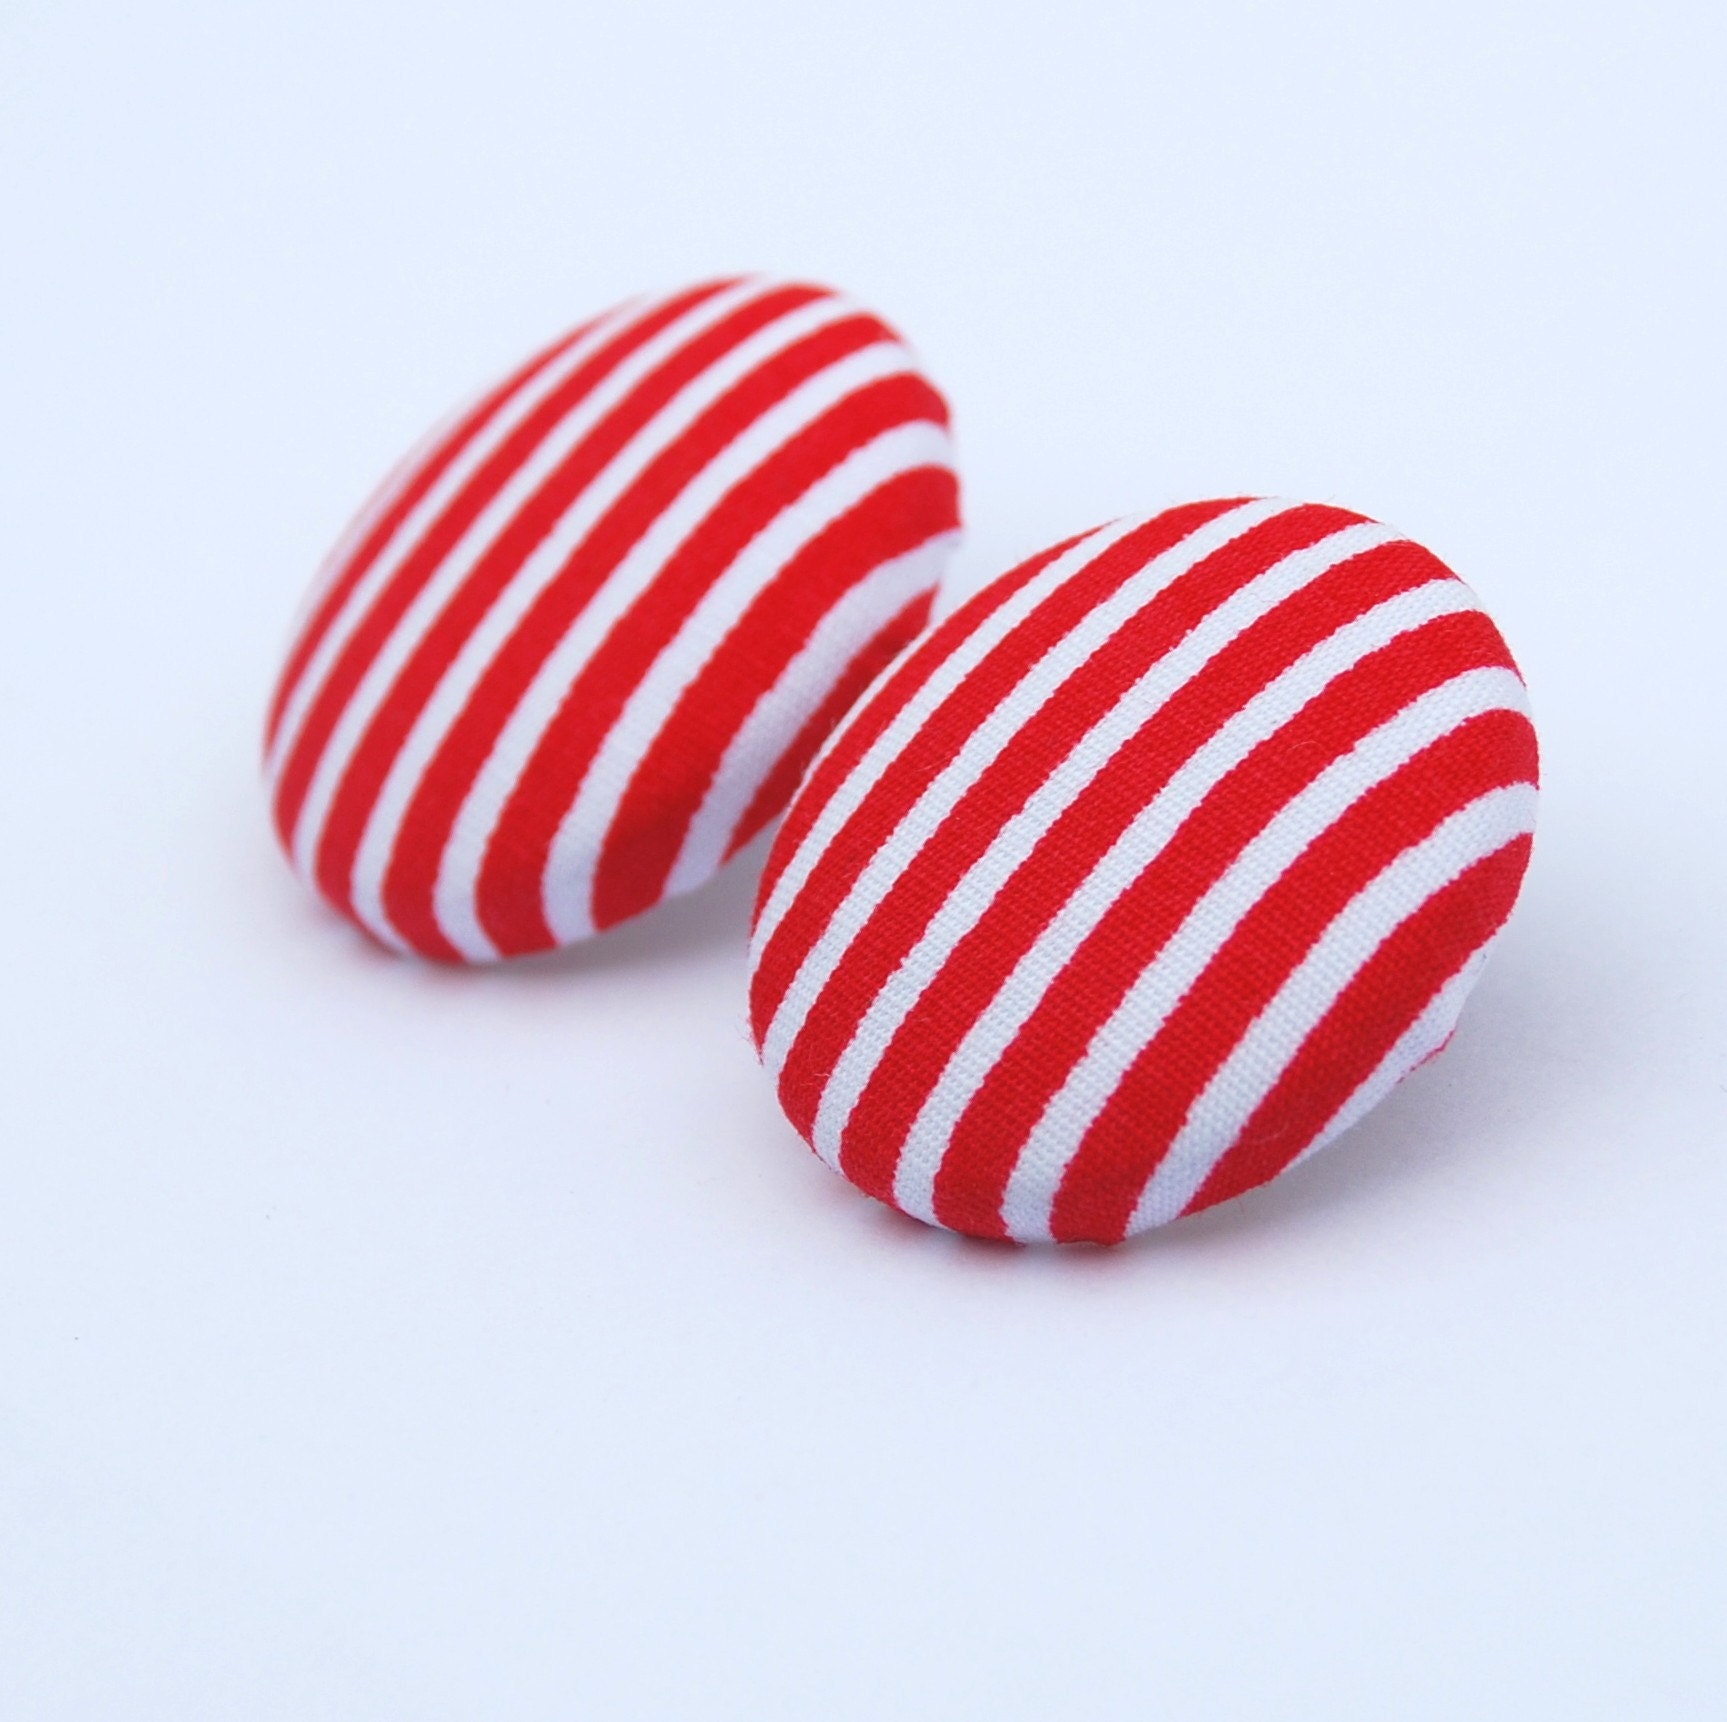 Red and White Stripe - One pair of extra large fabric button earrings